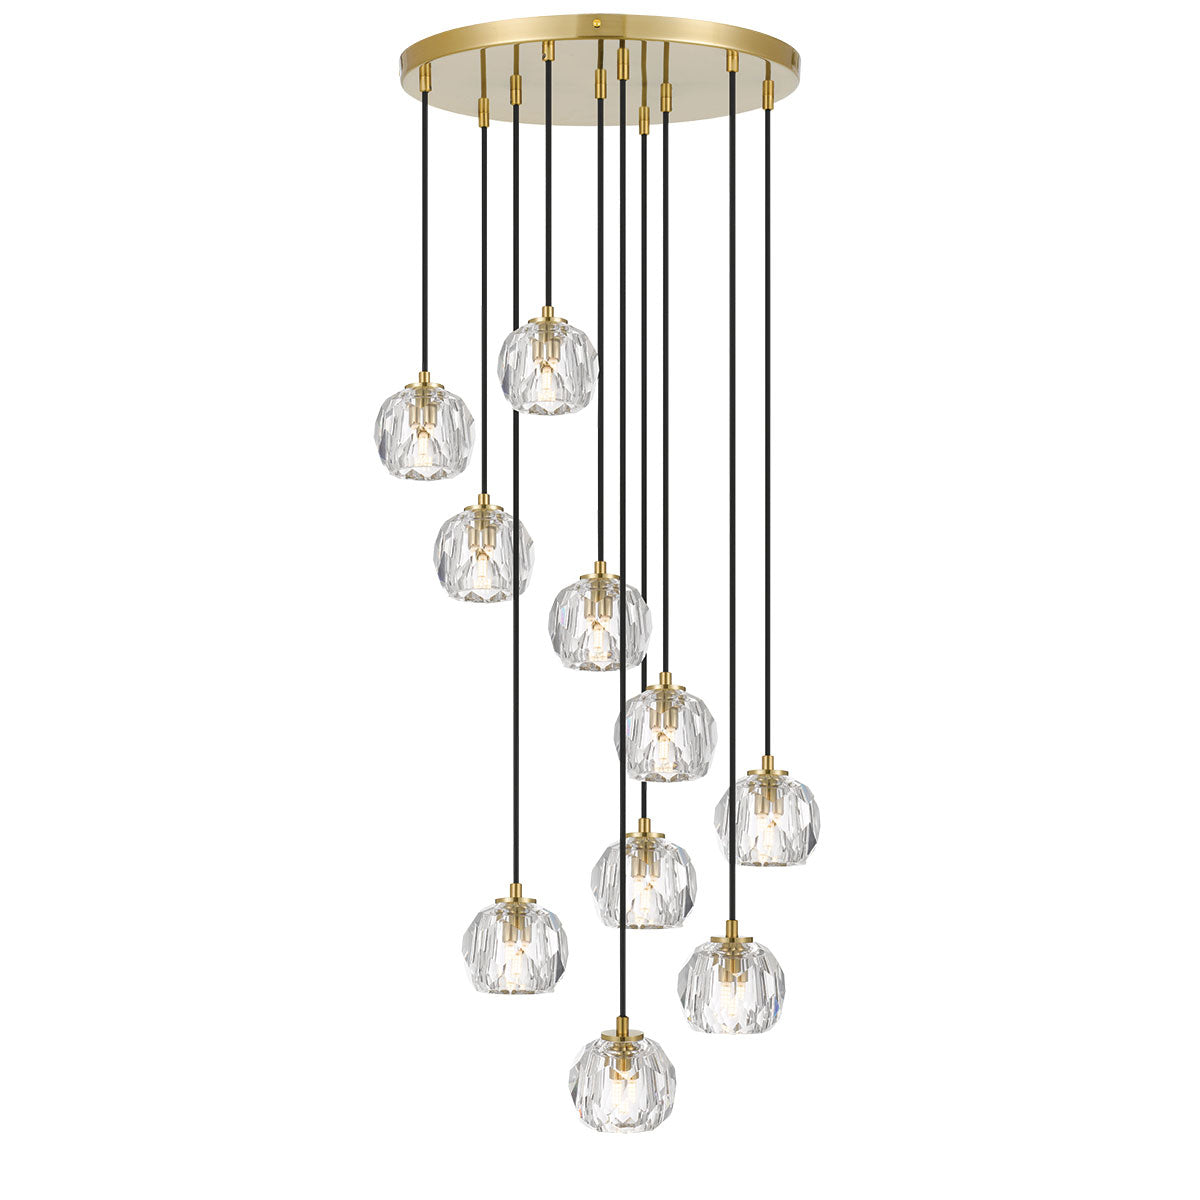 Zaha 10 Light Antique Gold with Crystal Pendant